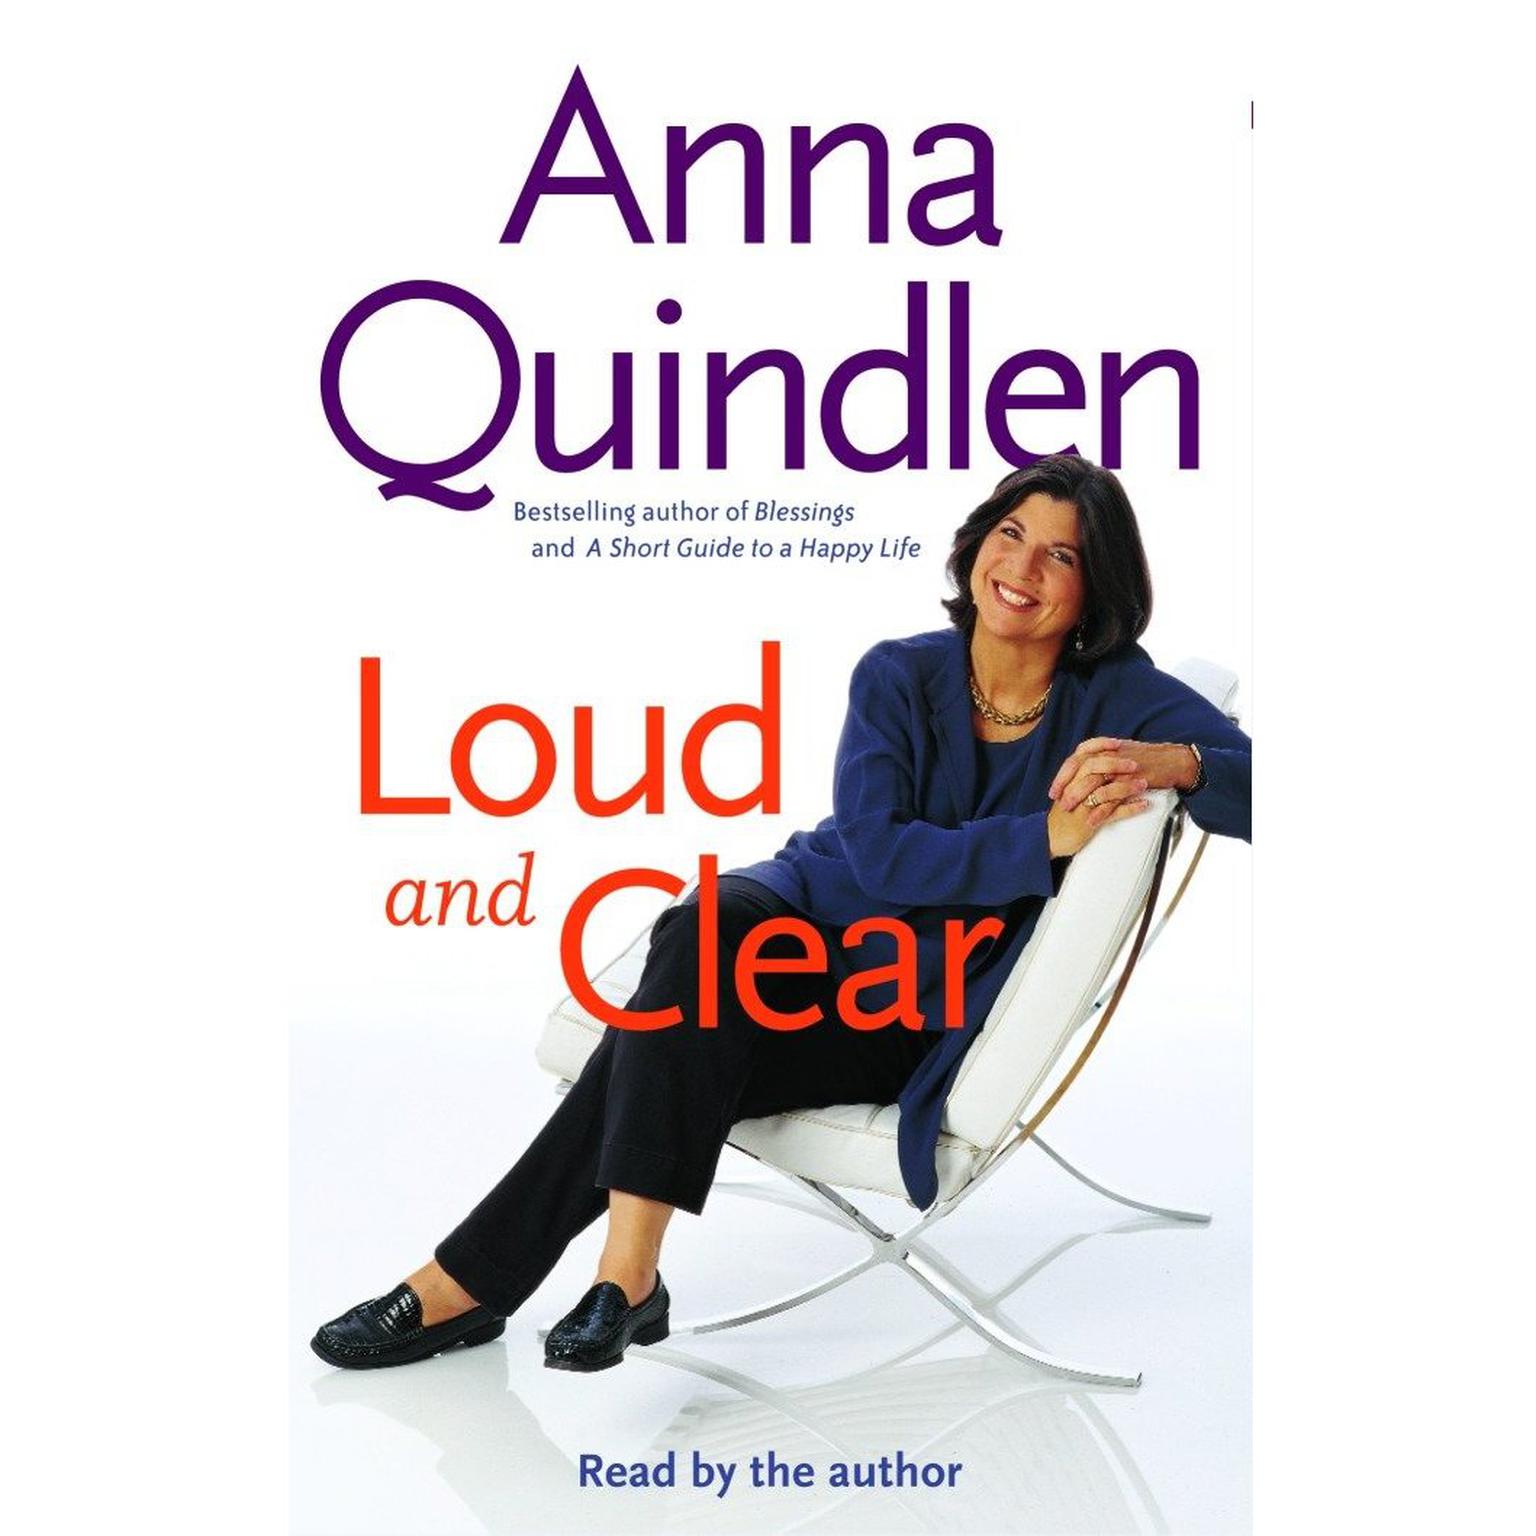 Loud and Clear (Abridged) Audiobook, by Anna Quindlen